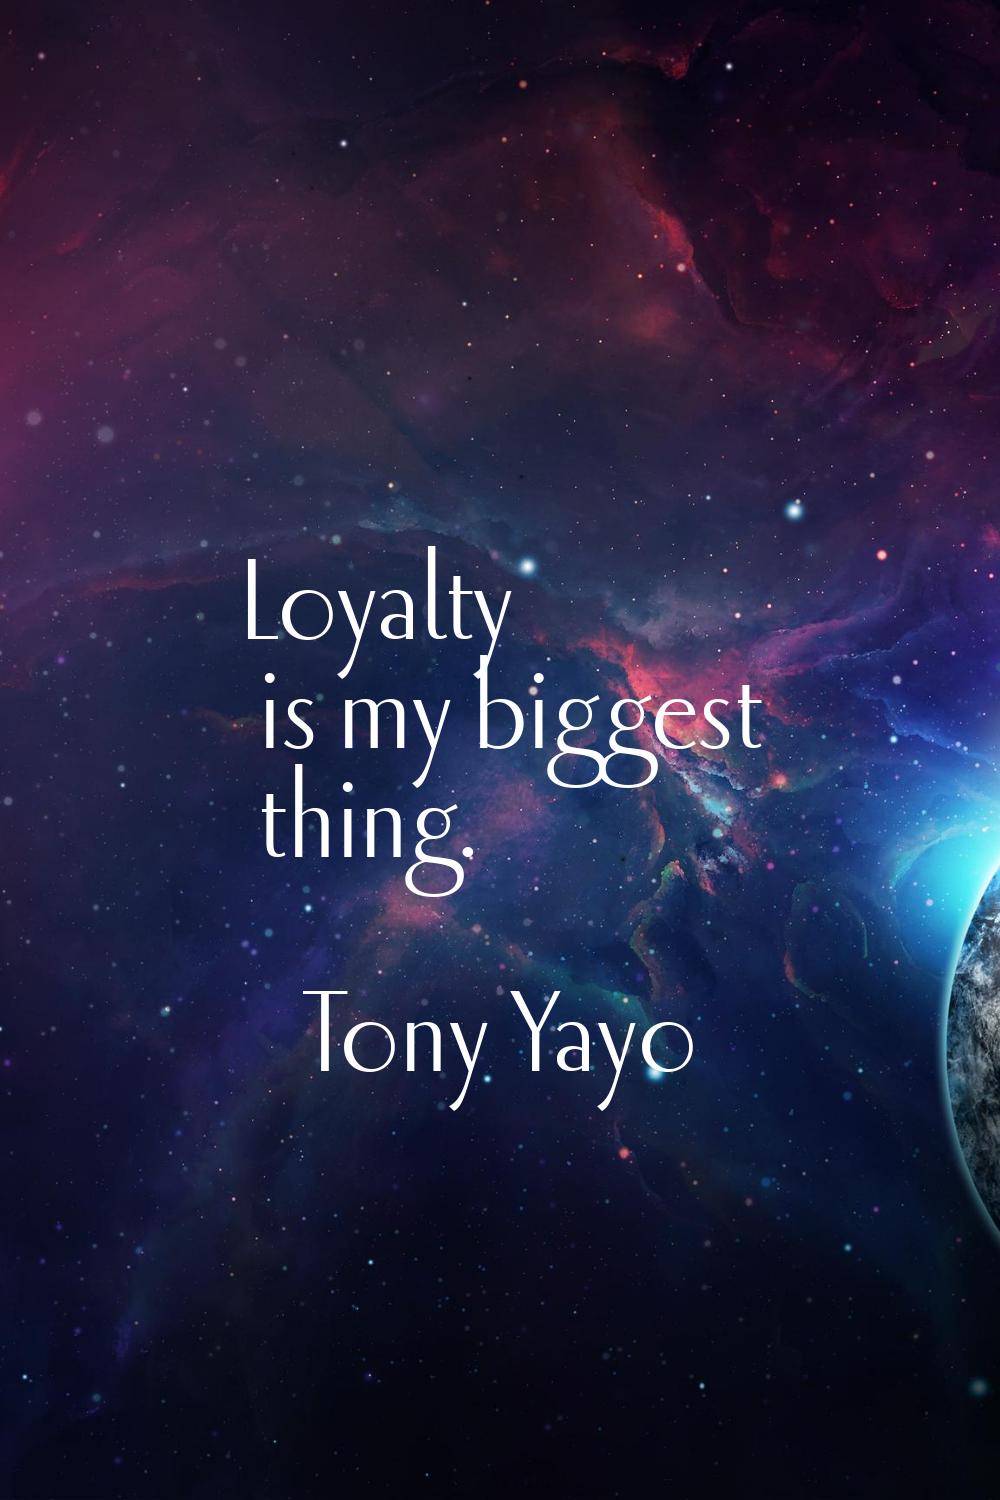 Loyalty is my biggest thing.